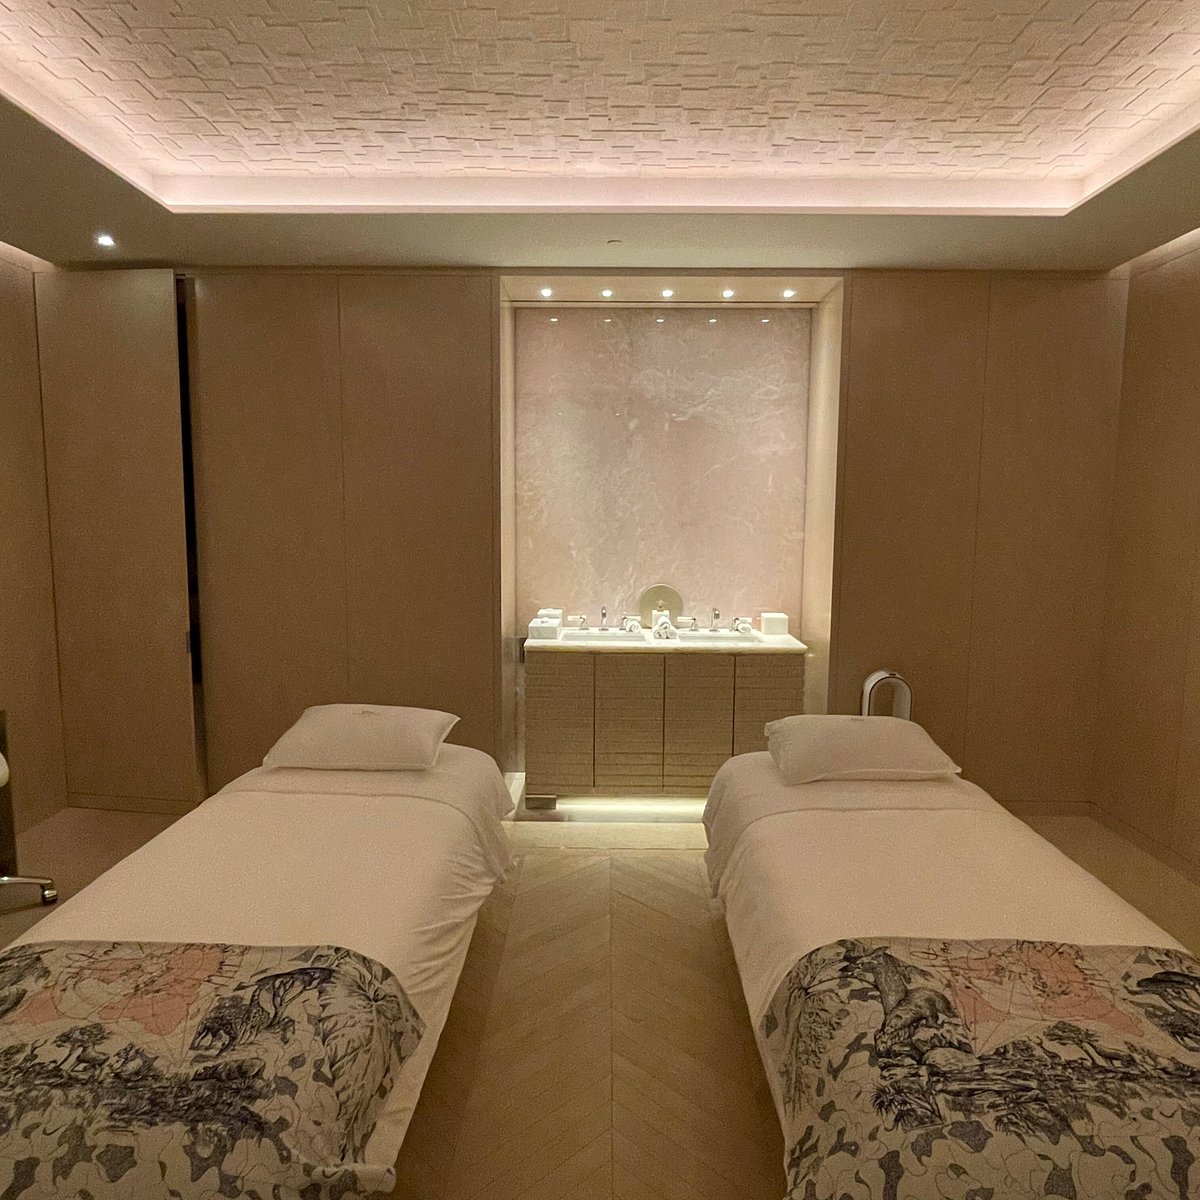 Dior Spa Cheval Blanc Paris - All You Need to Know BEFORE You Go